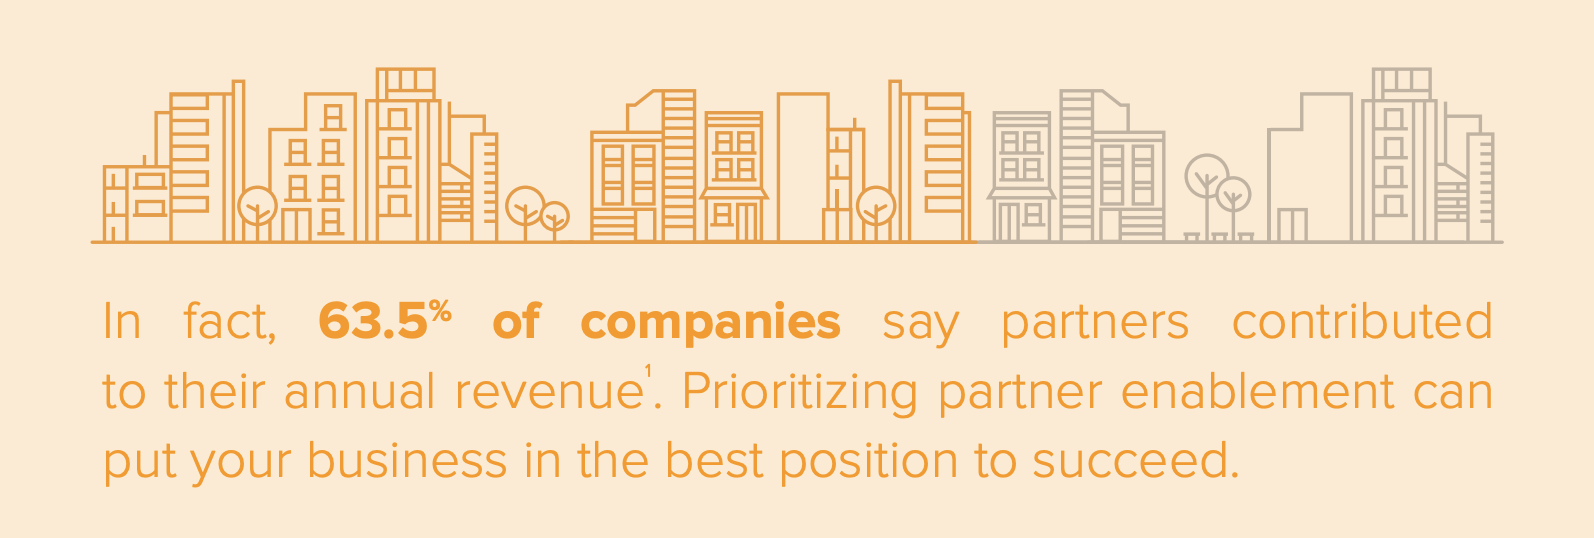 63.5% of companies say partners contributed to their annual revenue